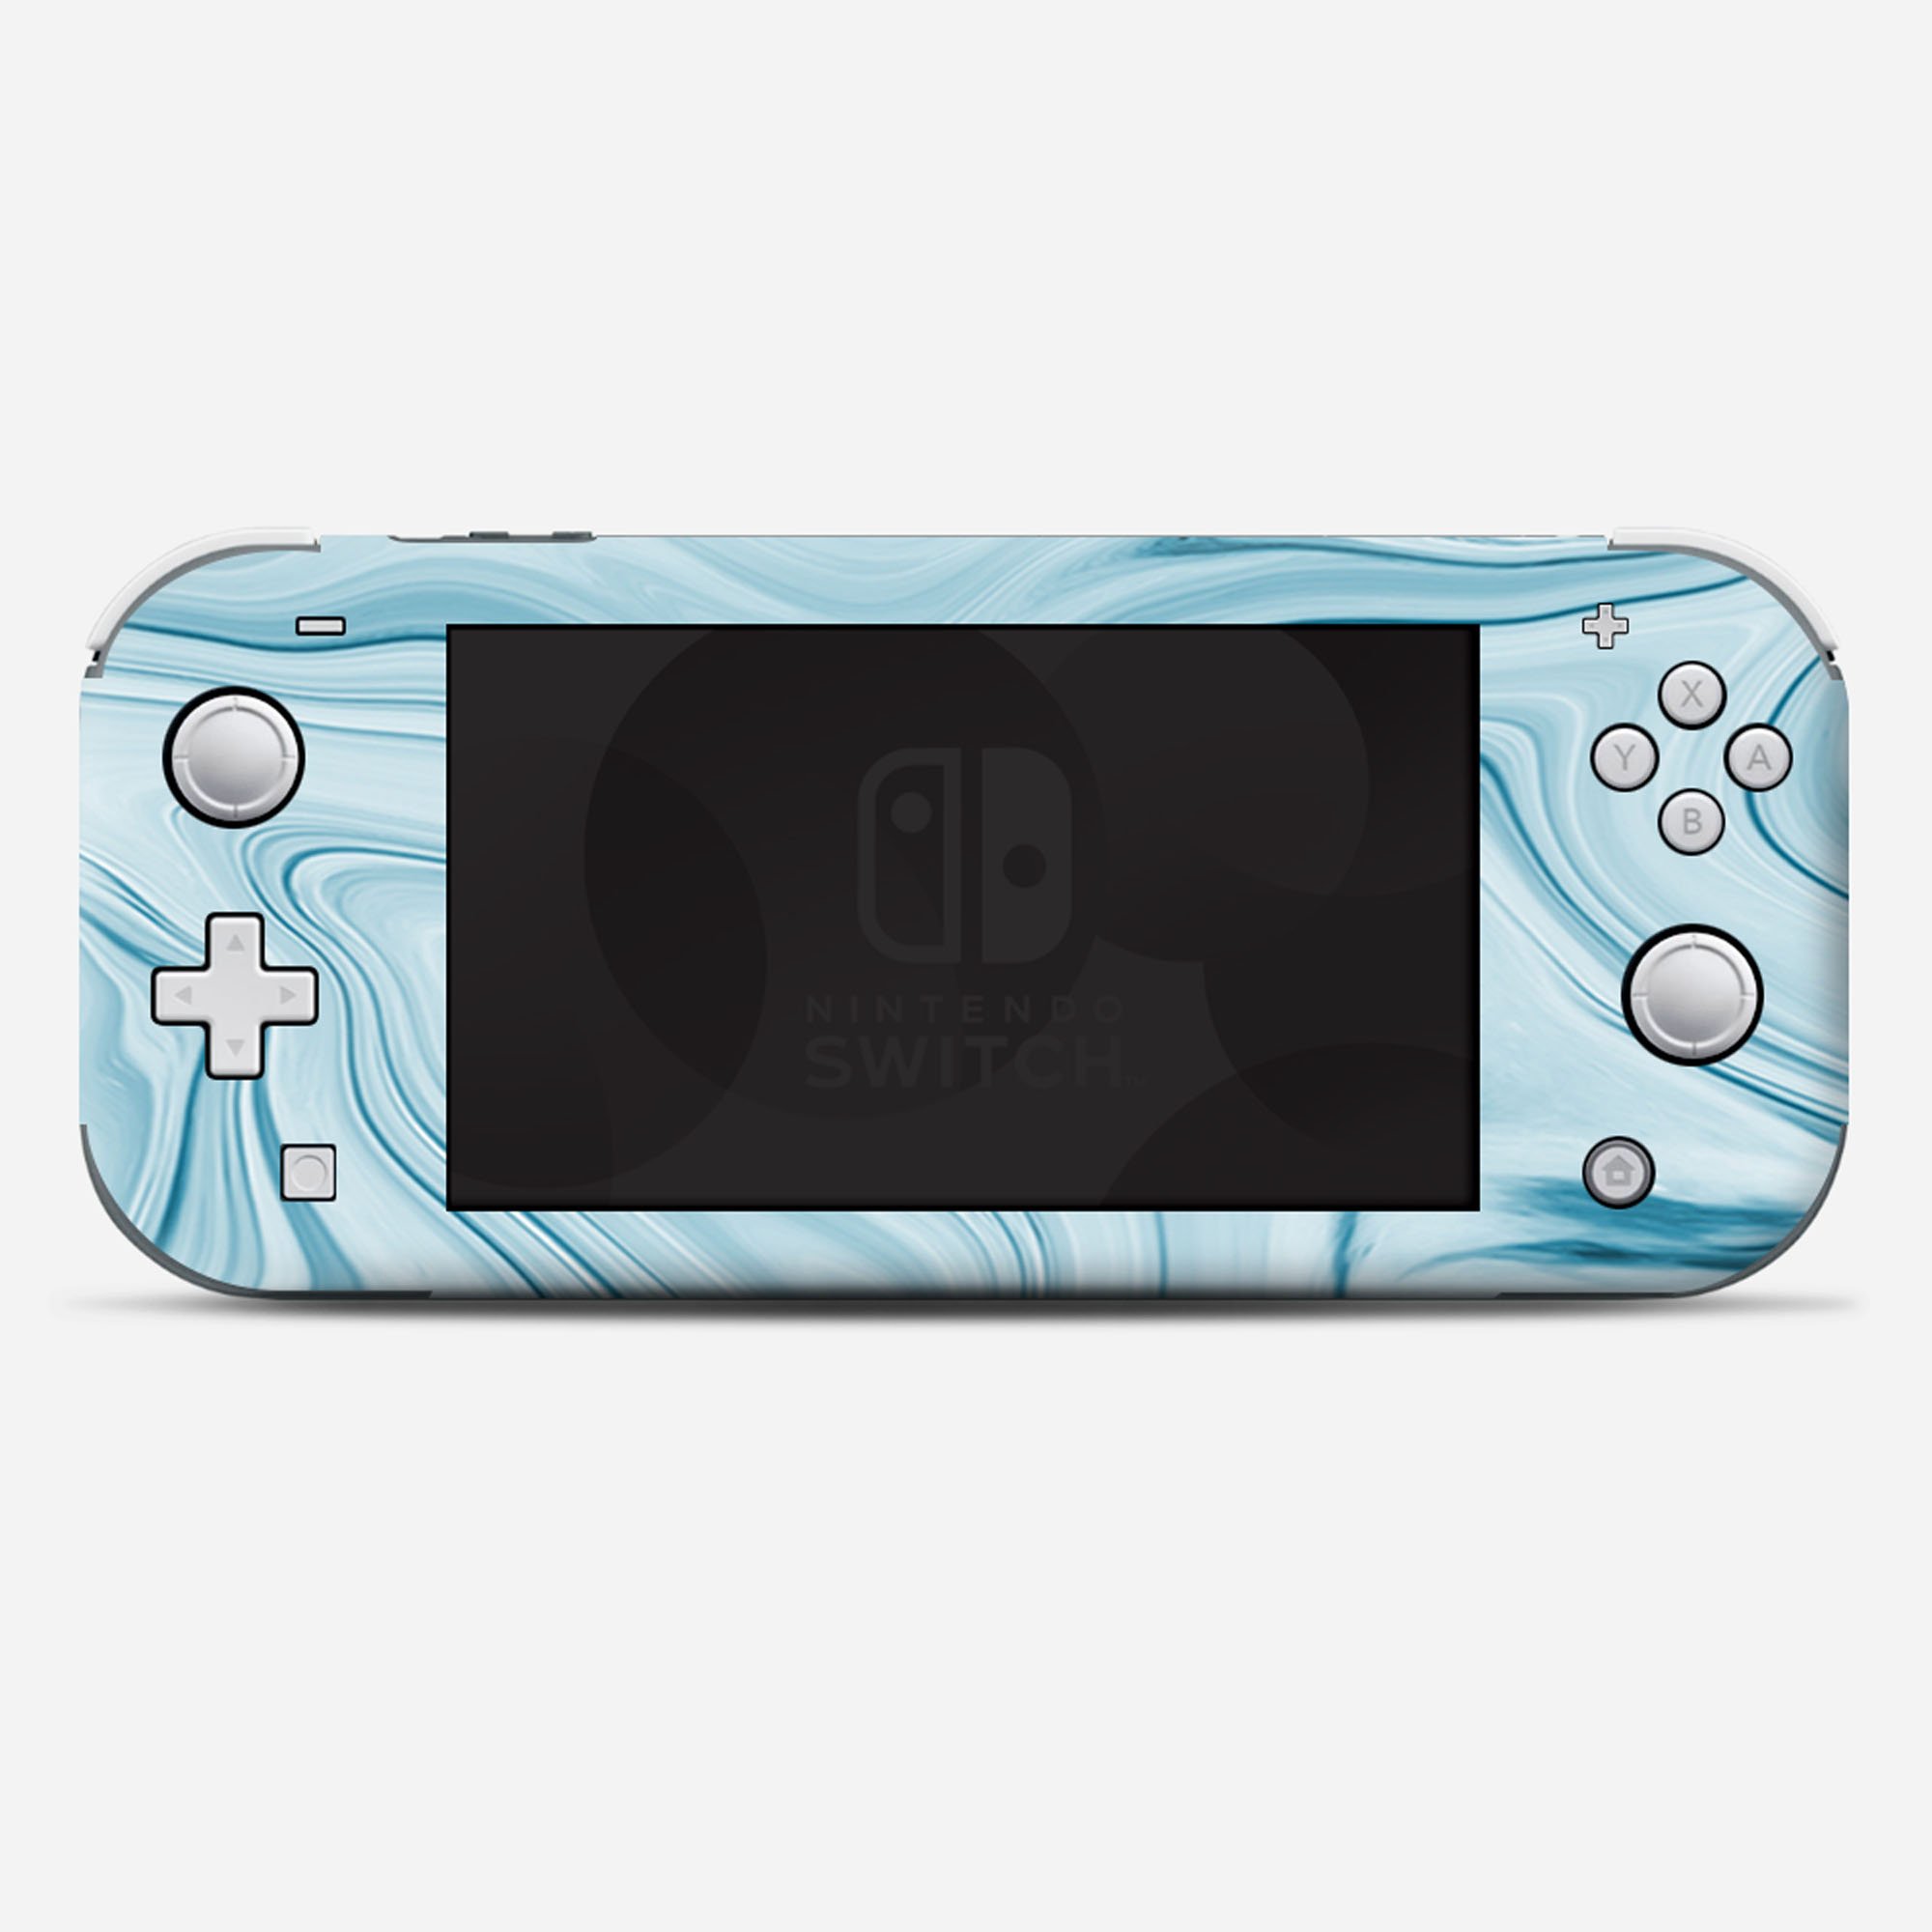 Nintendo Switch Lite Skins Decals Vinyl Wrap  - decal stickers skins cover -Baby Blue Ice Swirl Marble - image 2 of 4